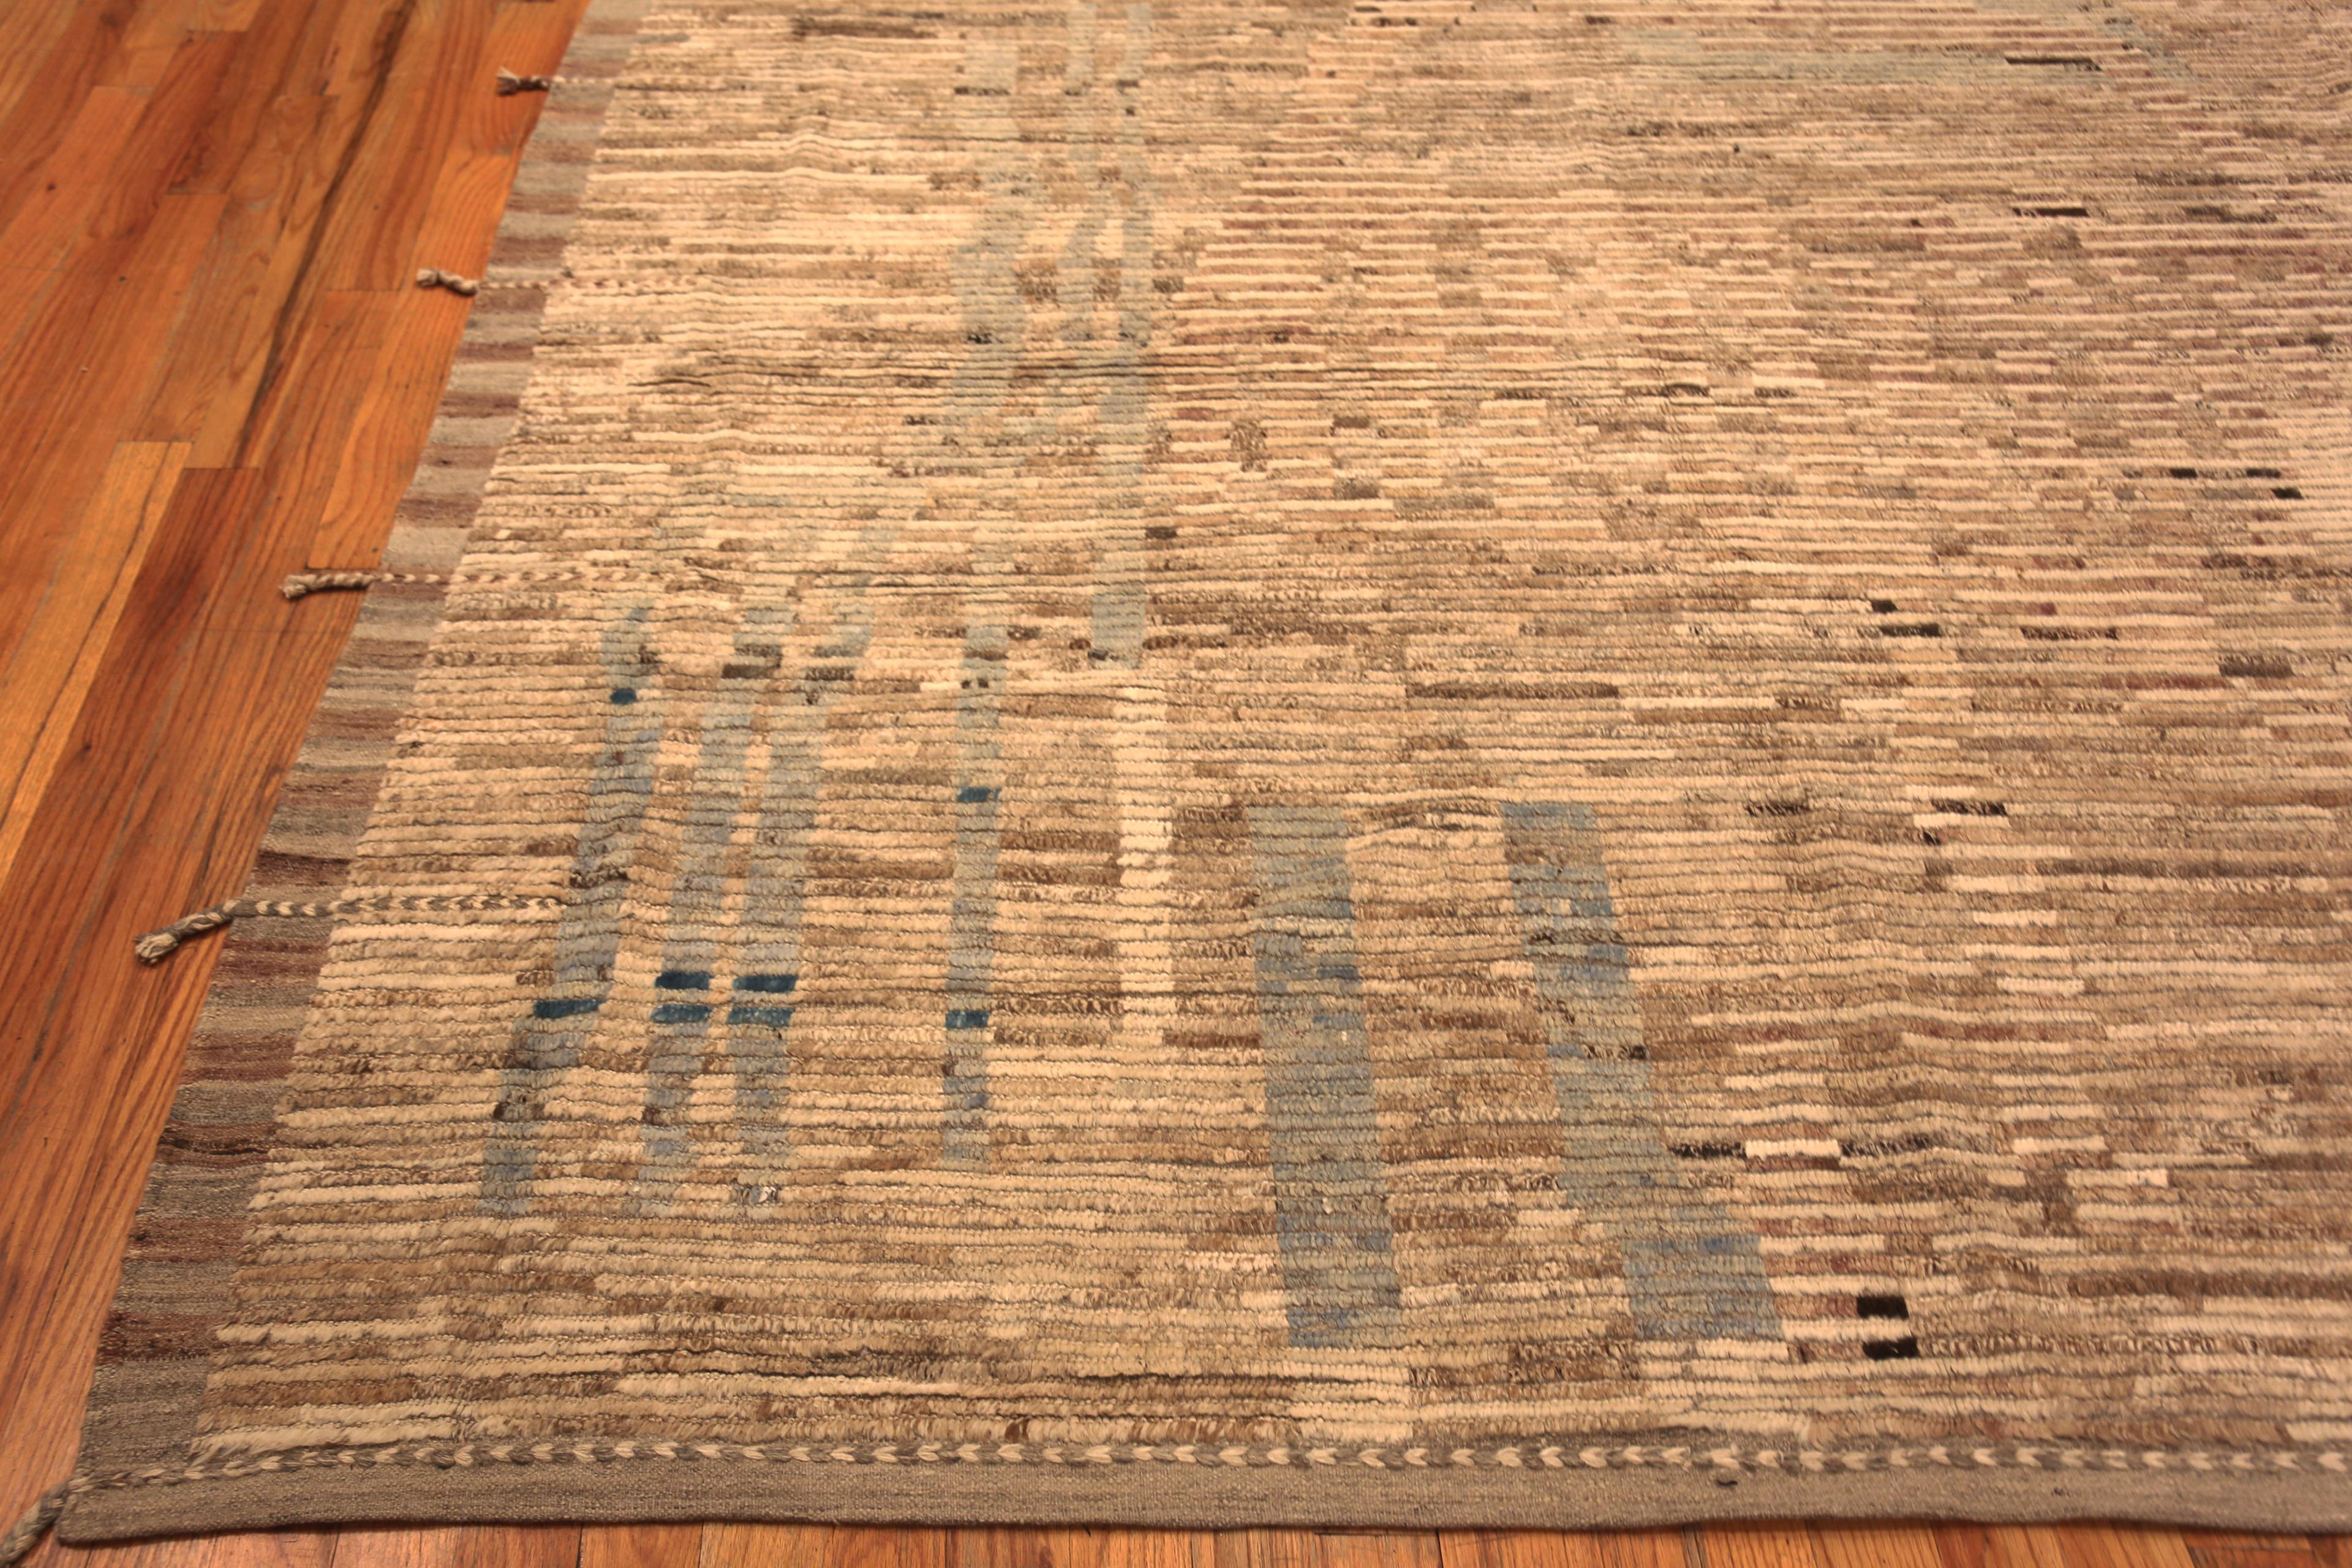 Central Asian Nazmiyal Collection Large Earthy Tones Trendy Modern Rug 14' x 16'6